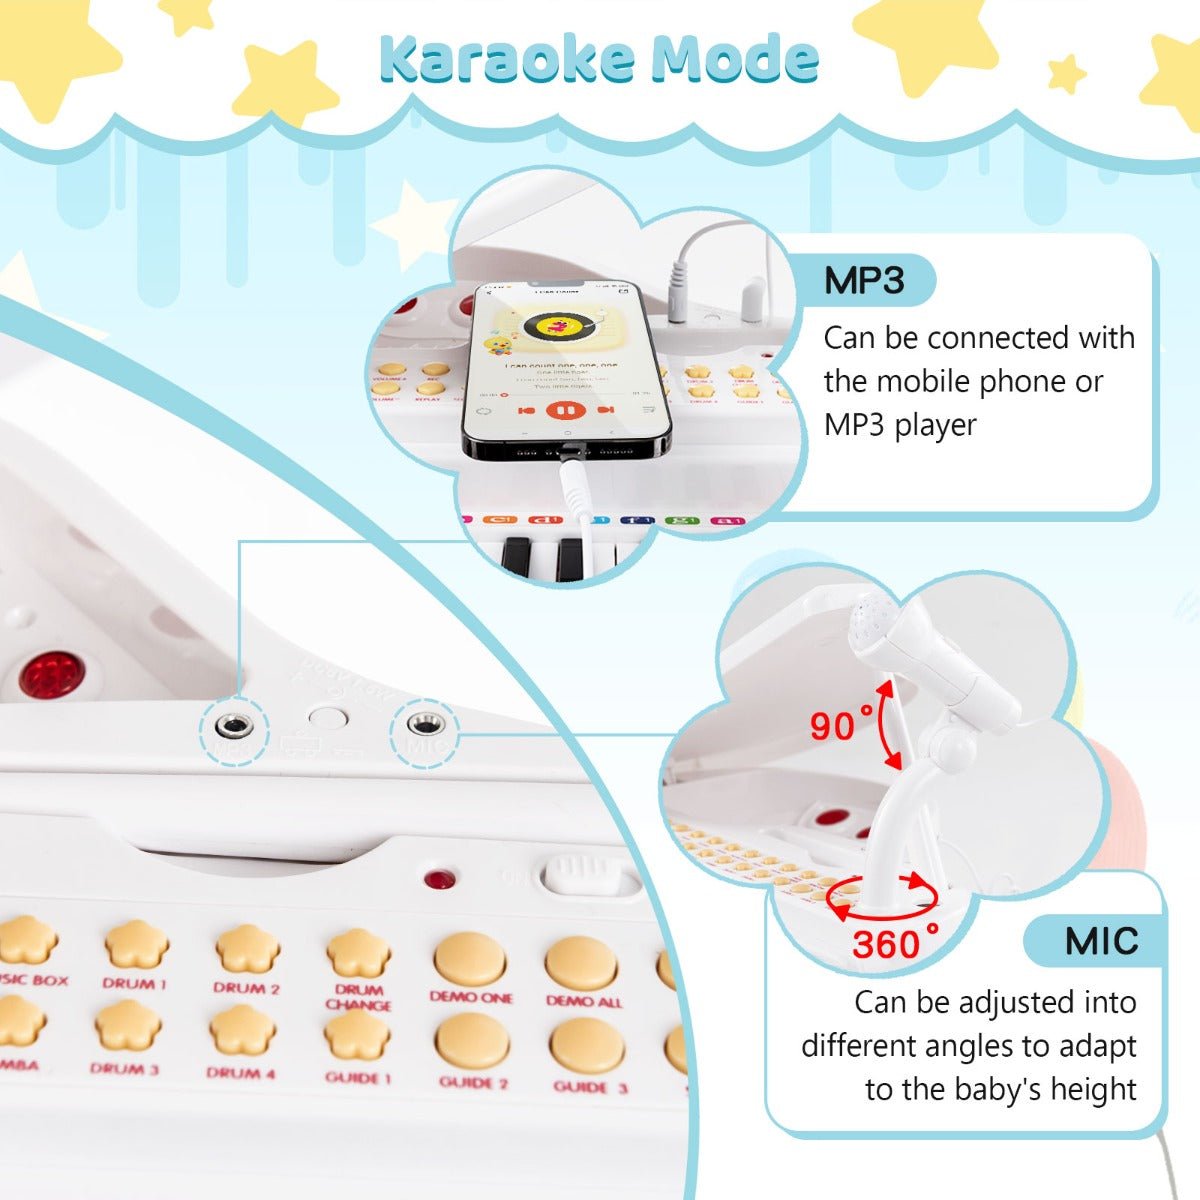 Explore Musical Creativity with the White Keyboard for Kids